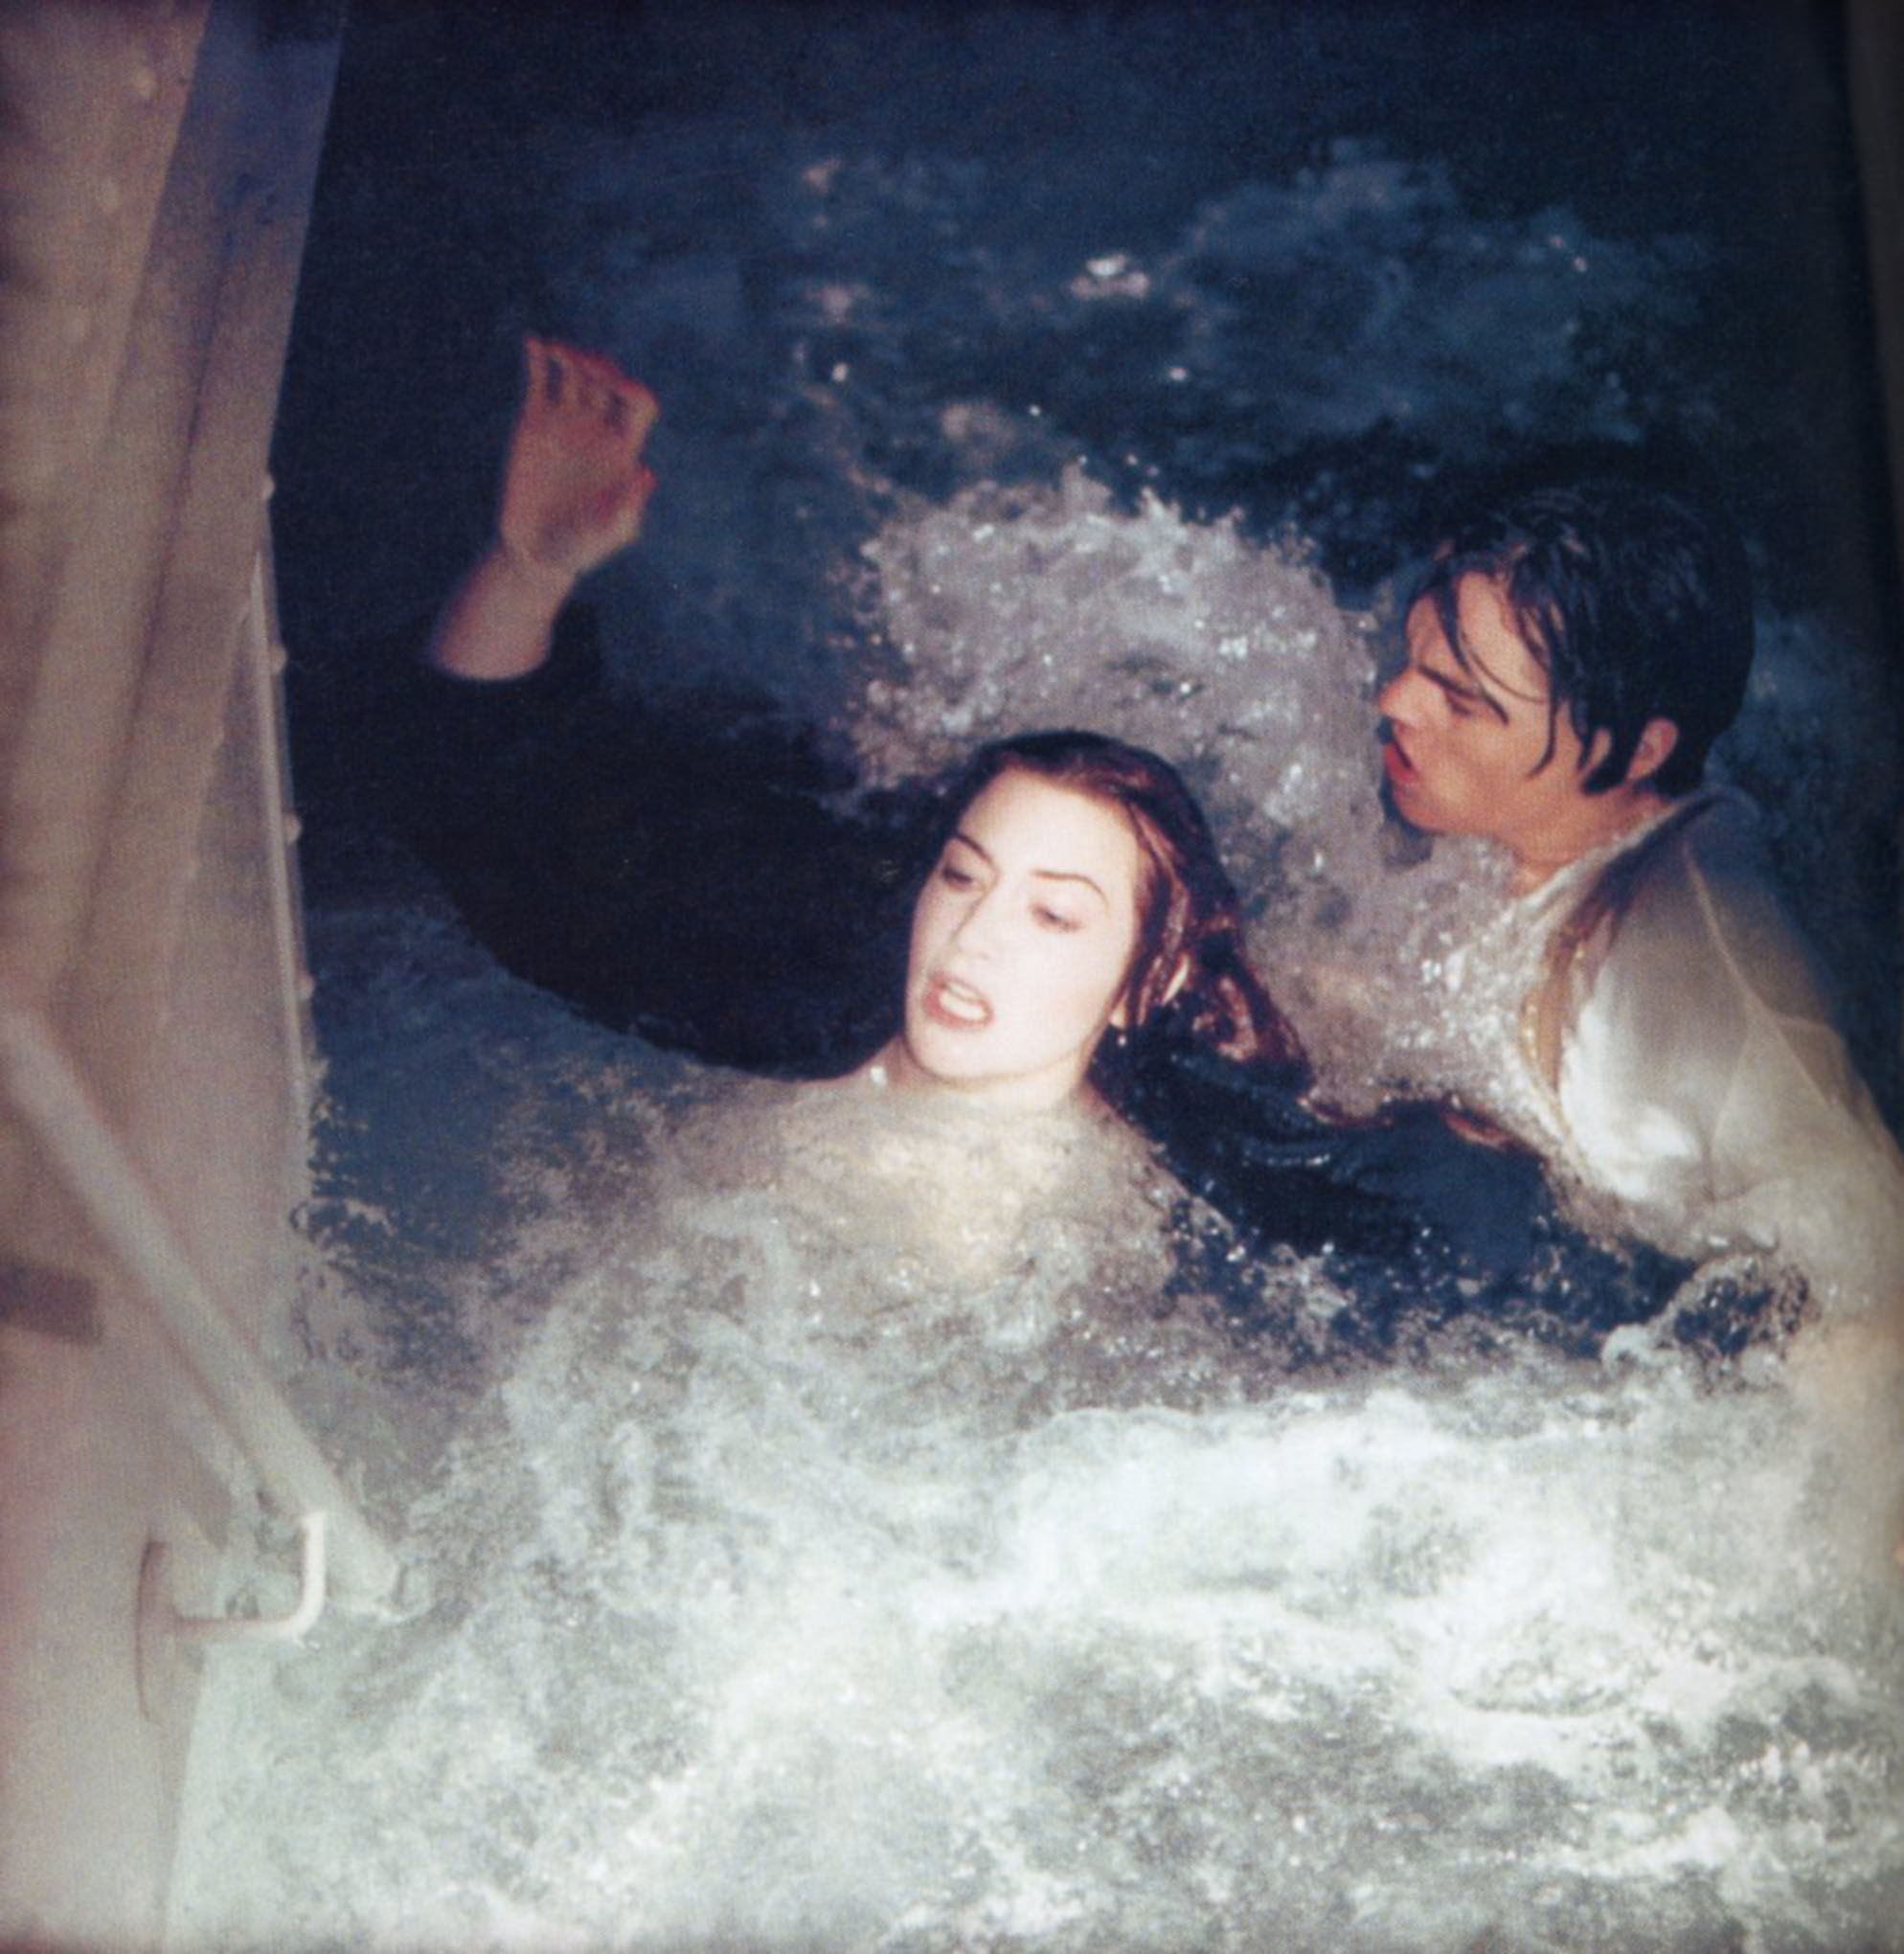 Winslet and DiCaprio struggling in water during a flooding scene